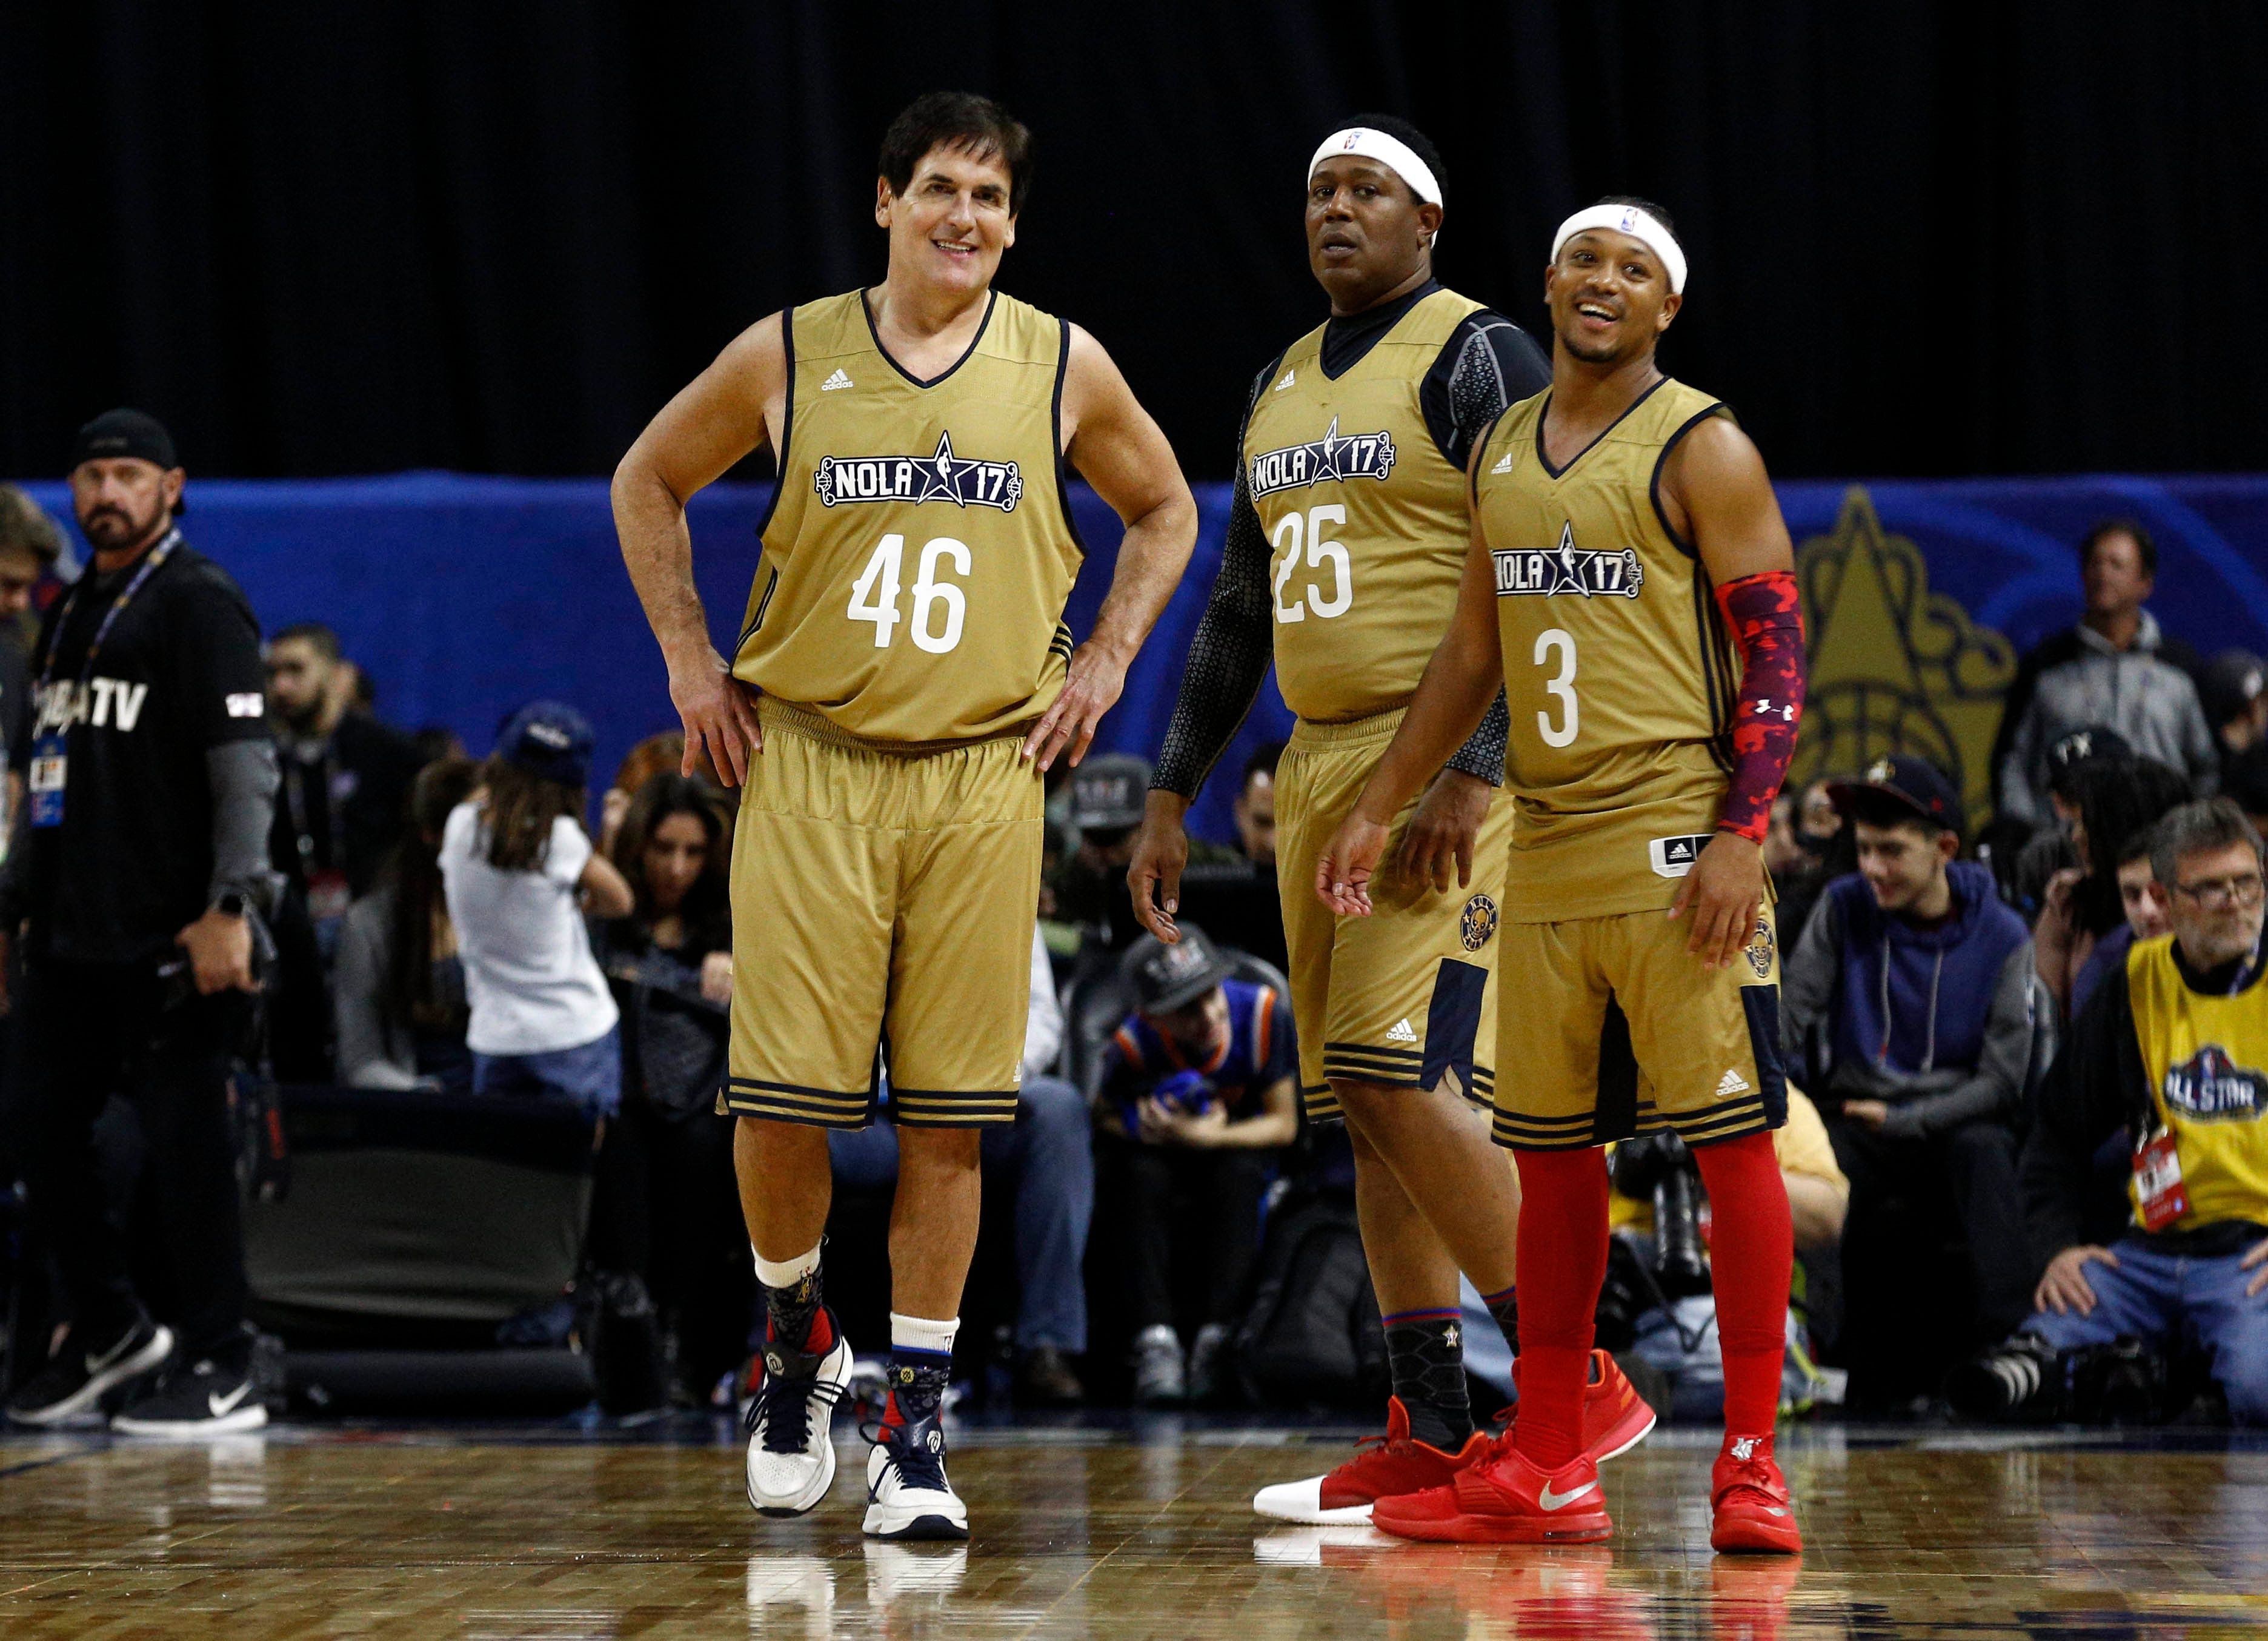 Mark Cuban takes jab at Trump by wearing No. 46 in NBA Celebrity Game